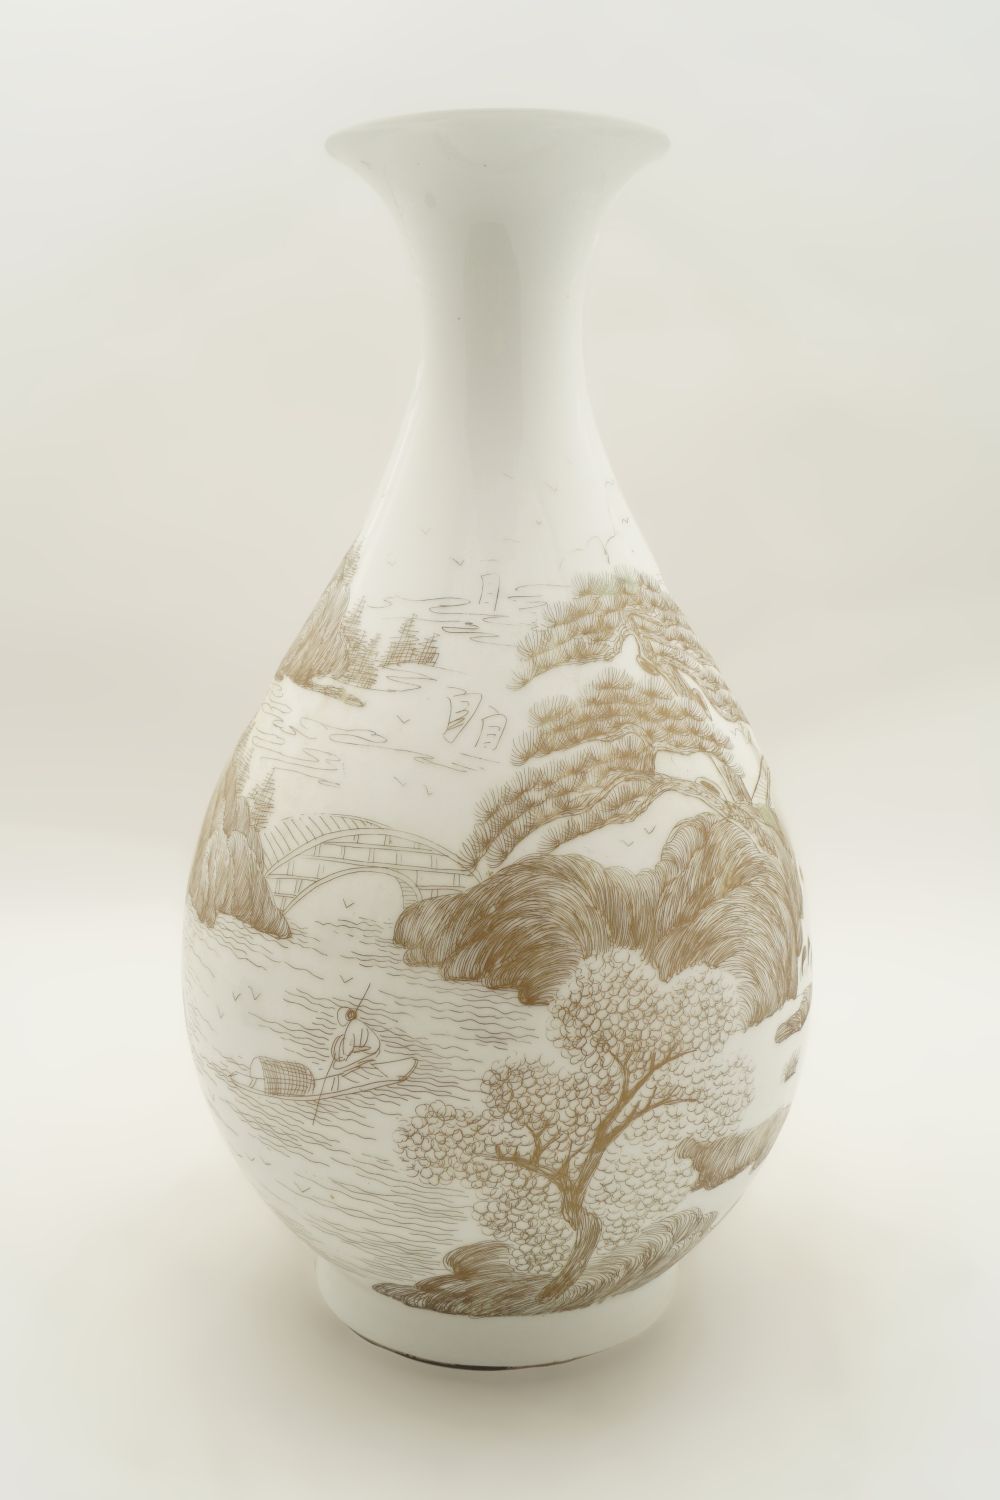 CHINESE QING PERIOD MEIPING VASE - Image 2 of 4